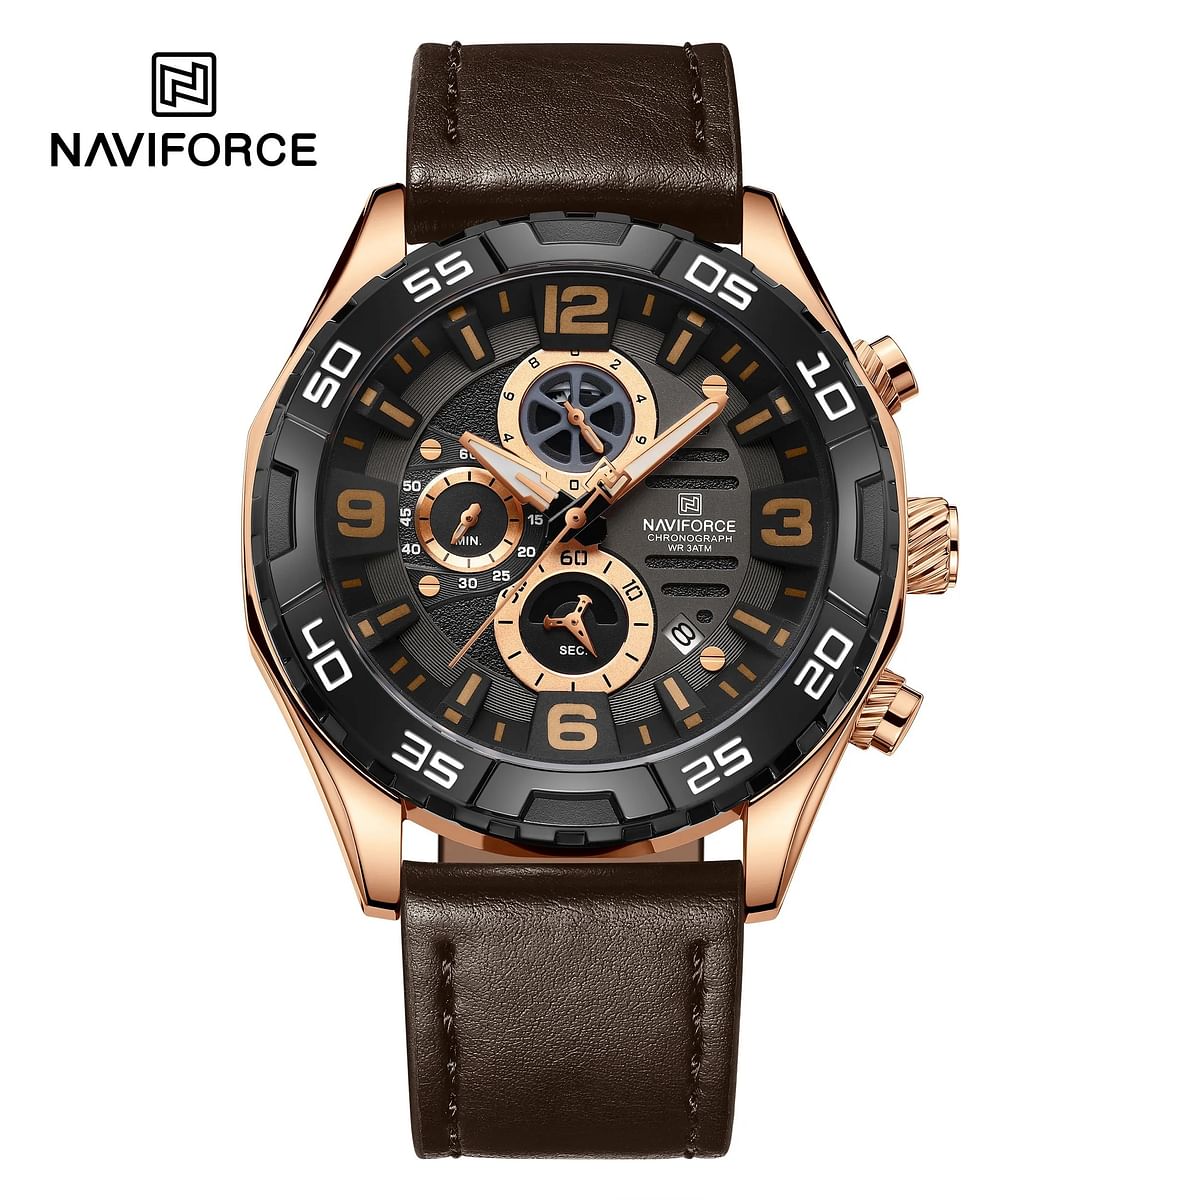 NAVIFORCE NF8043 CHRONOGLIDE Men’s Watch Waterproof Luxury Style with Leather Strap - 46MM - Rose Gold And Brown